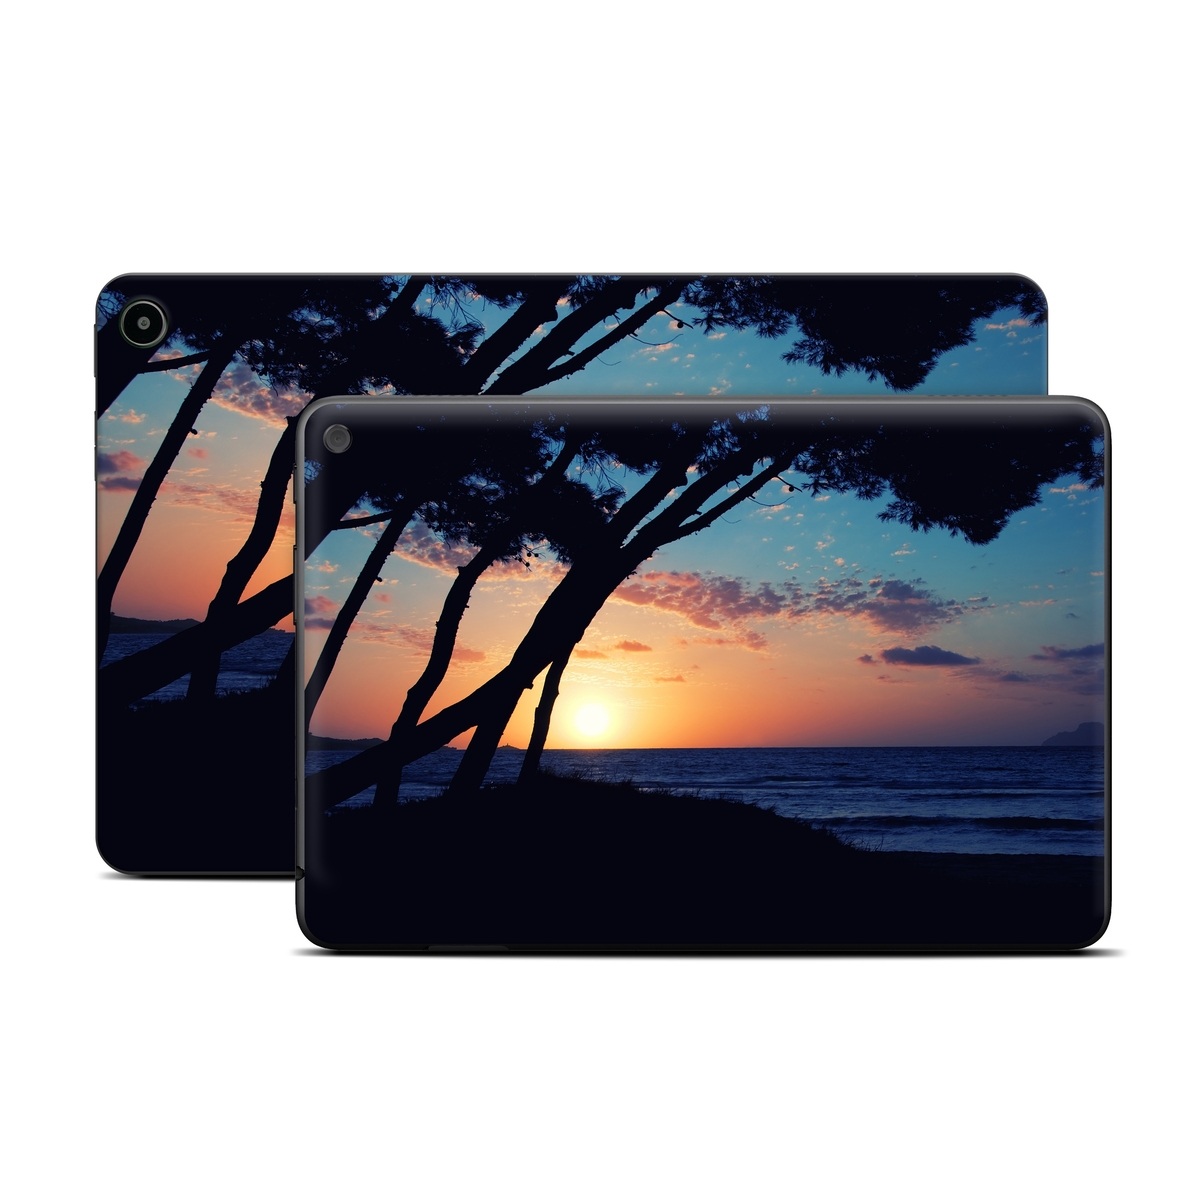 Amazon Fire Tablet Series Skin Skin design of Sky, Horizon, Nature, Tree, Sunset, Sunrise, Ocean, Sea, Natural landscape, Afterglow, with black, gray, blue, green, red, pink colors